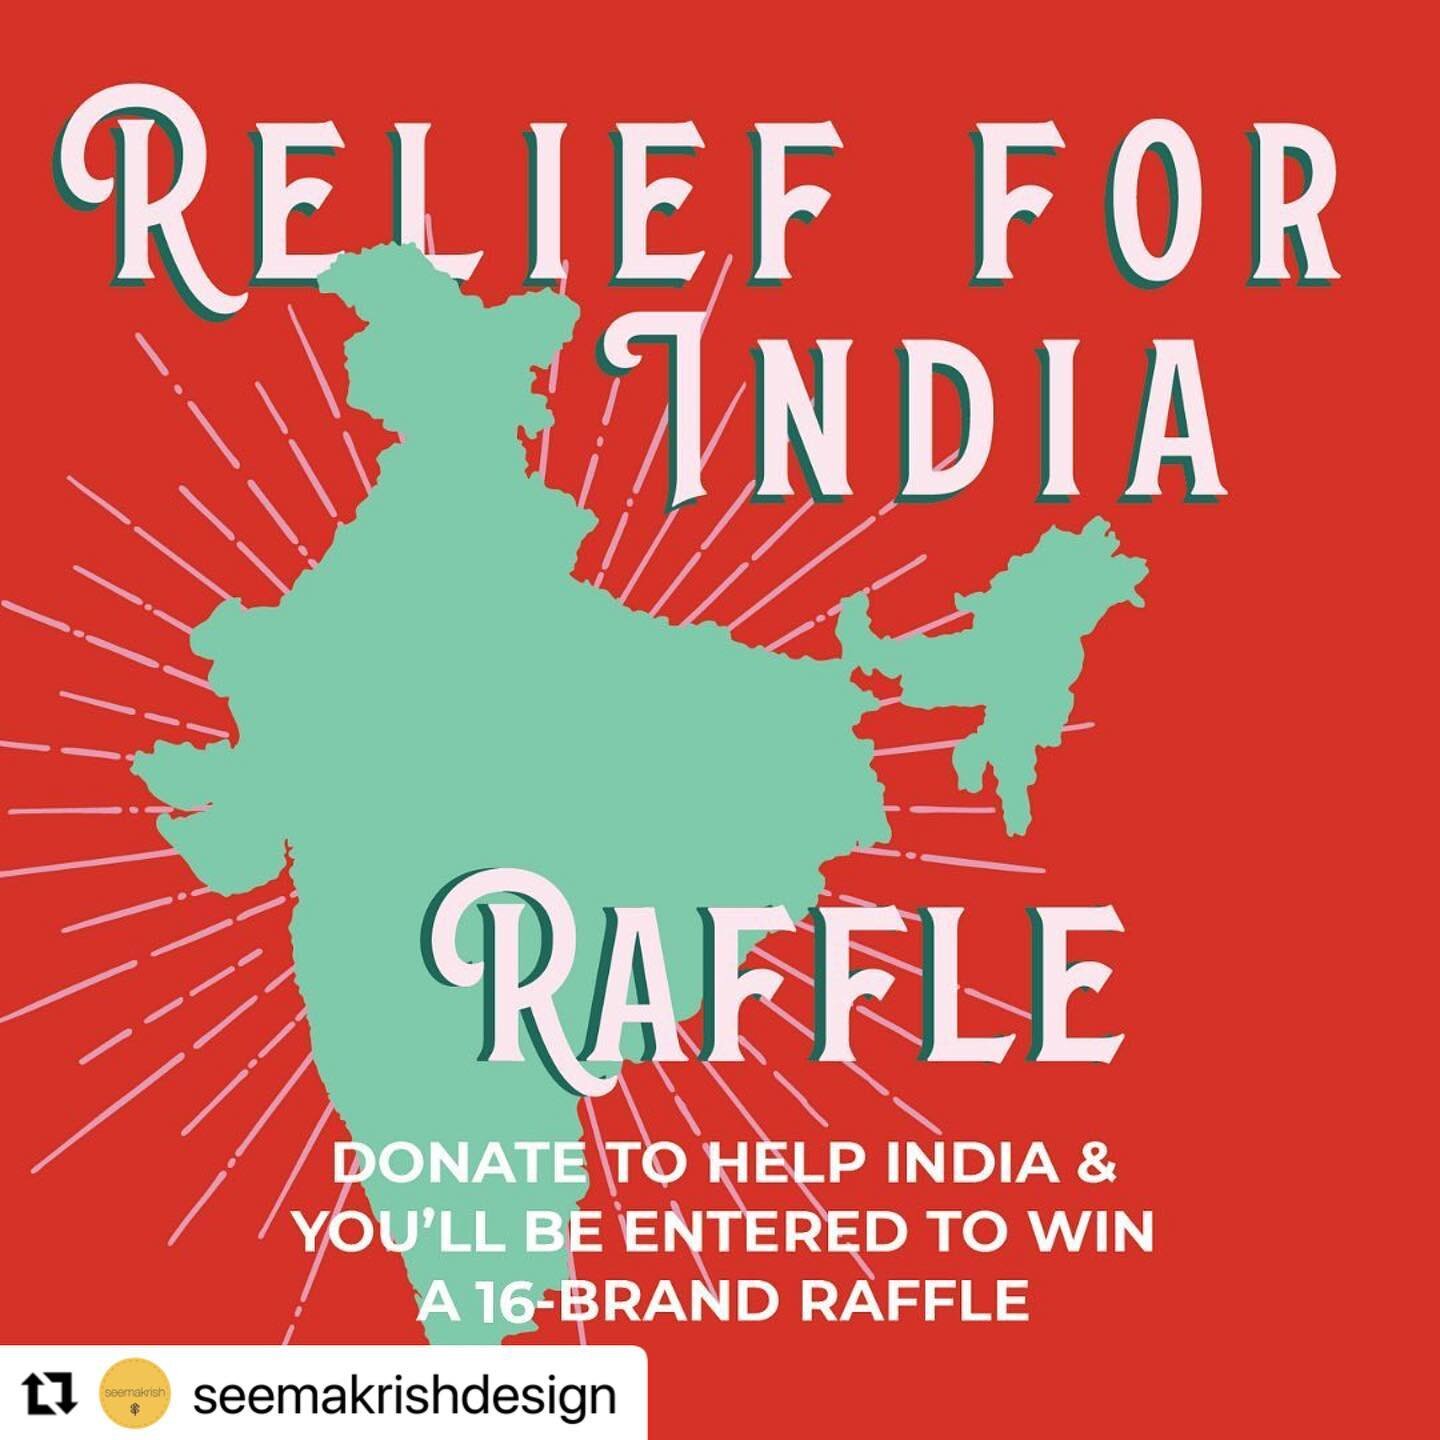 Raffle (featuring several of my brilliant guests) ends Friday - I know many have already found ways to contribute but think of this one as a bonus - with the possibility of a wonderful gift thrown in! #Repost @seemakrishdesign with @make_repost

RELI